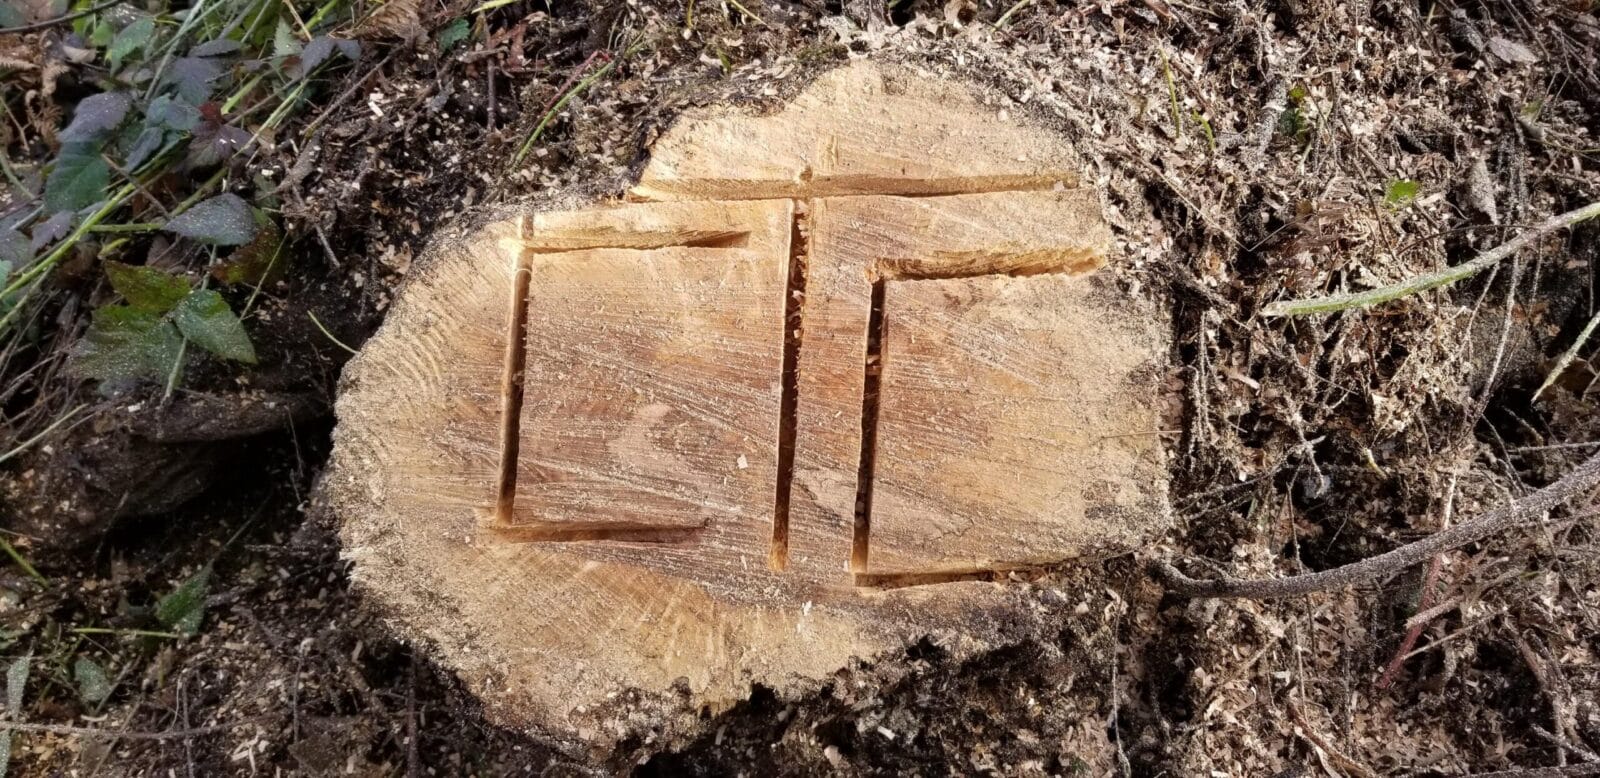 Stump of tree with CTC carved into it